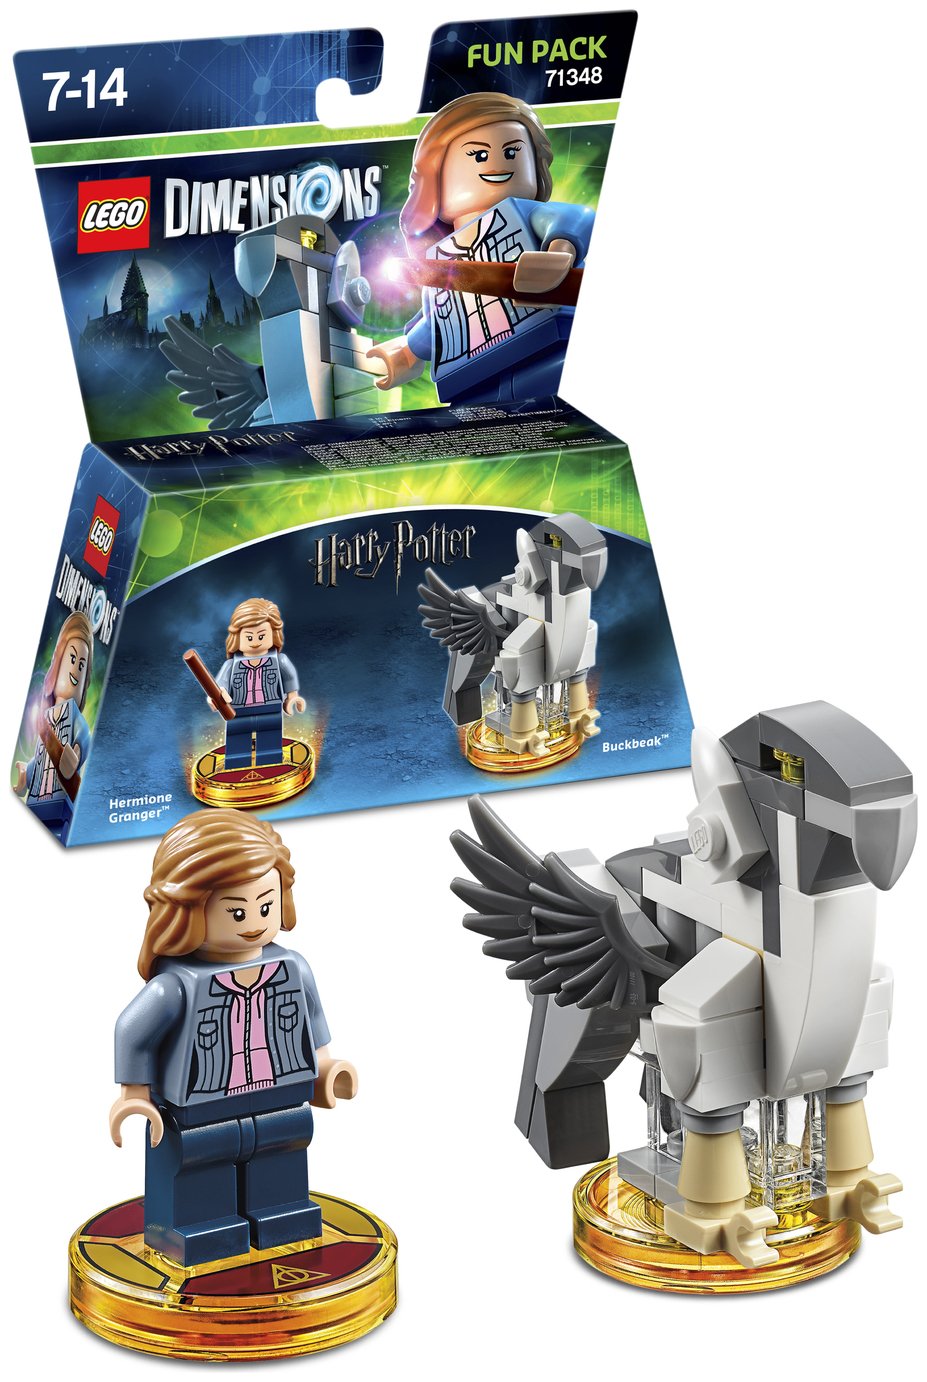 LEGO Dimensions Harry Potter Fun Pack